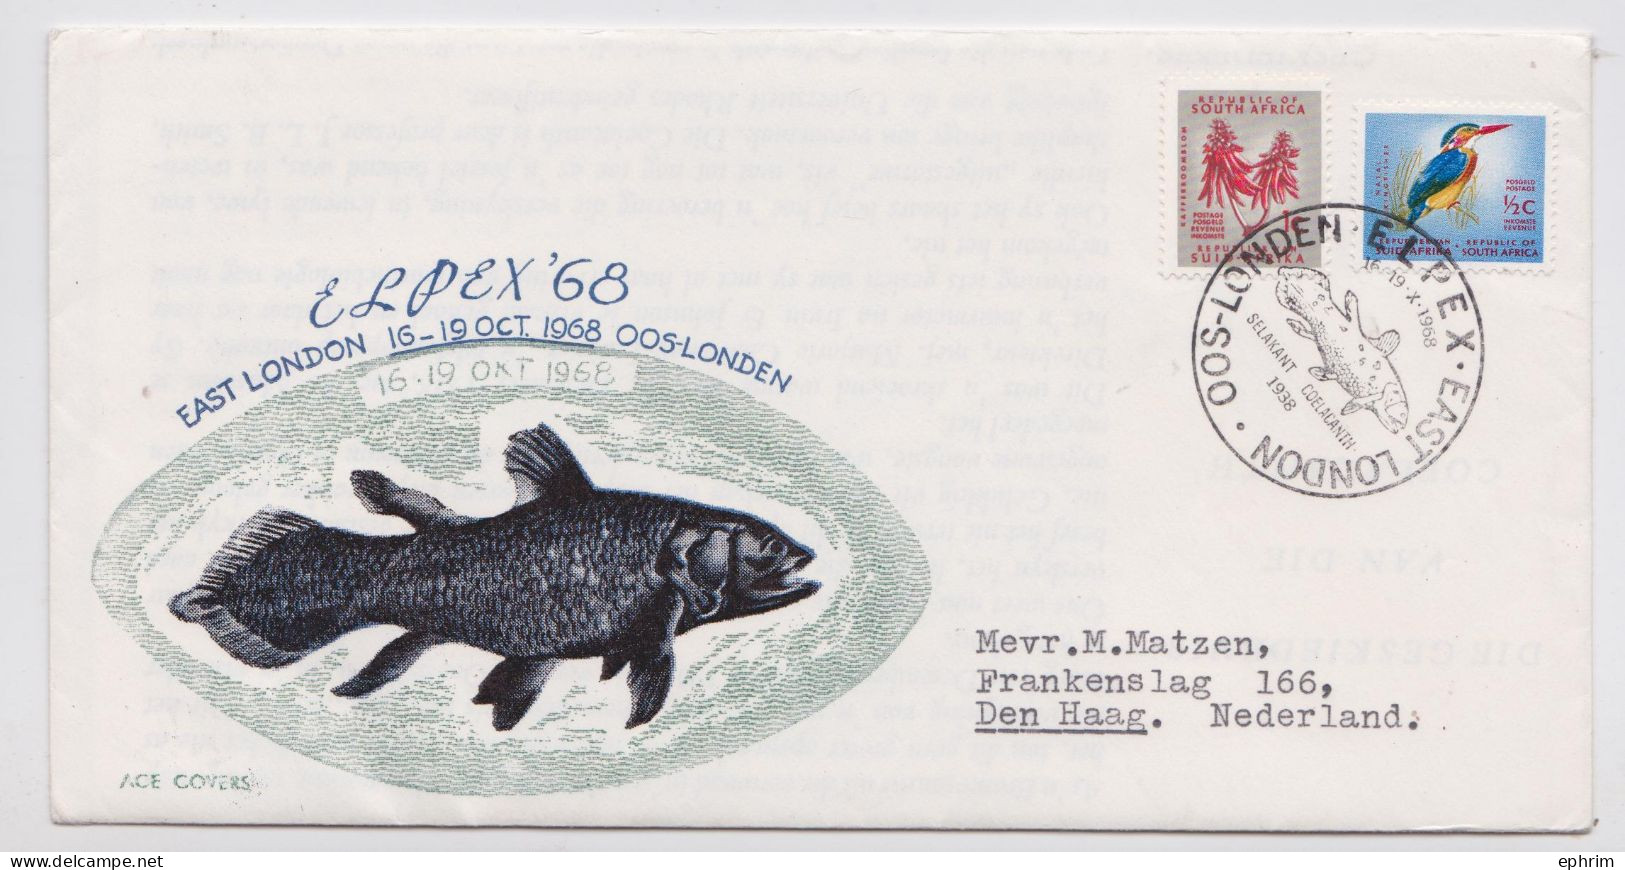 ELPEX 68 EAST LONDON SOUTH AFRICA ENVELOPPE TIMBRE POISSON FOSSILE COELACANTHE FOSSIL COELACANTH SELAKANT STAMP COVER - Briefe U. Dokumente